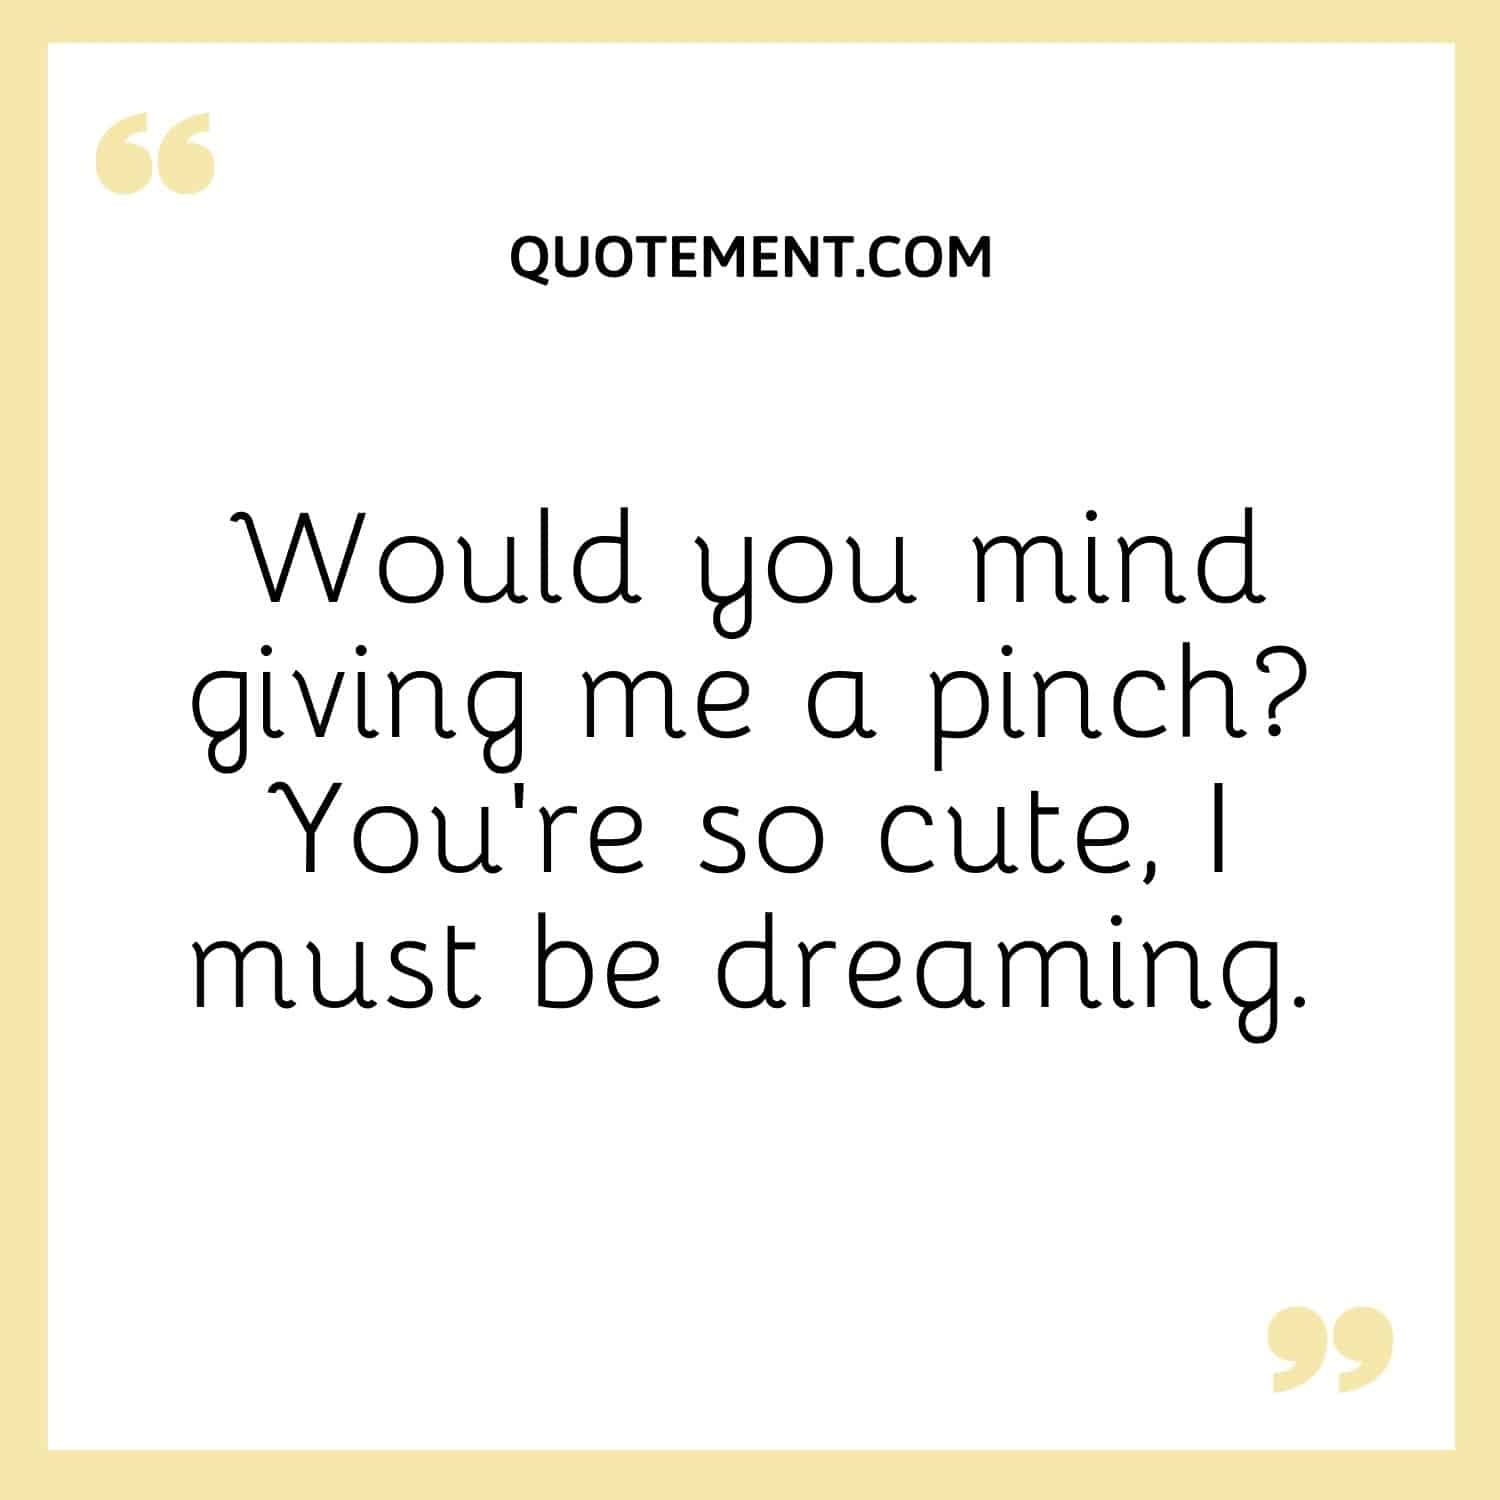 Would you mind giving me a pinch